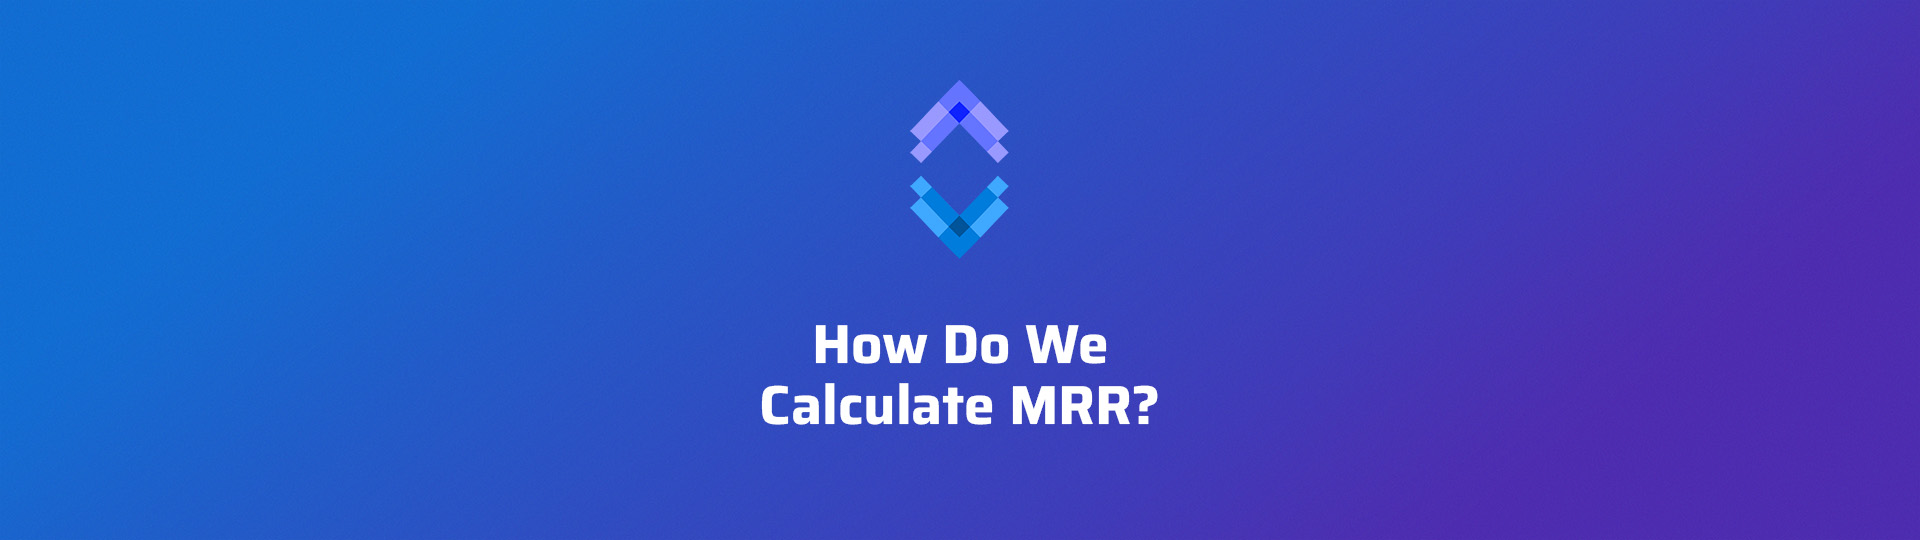 How Do We Calculate MRR